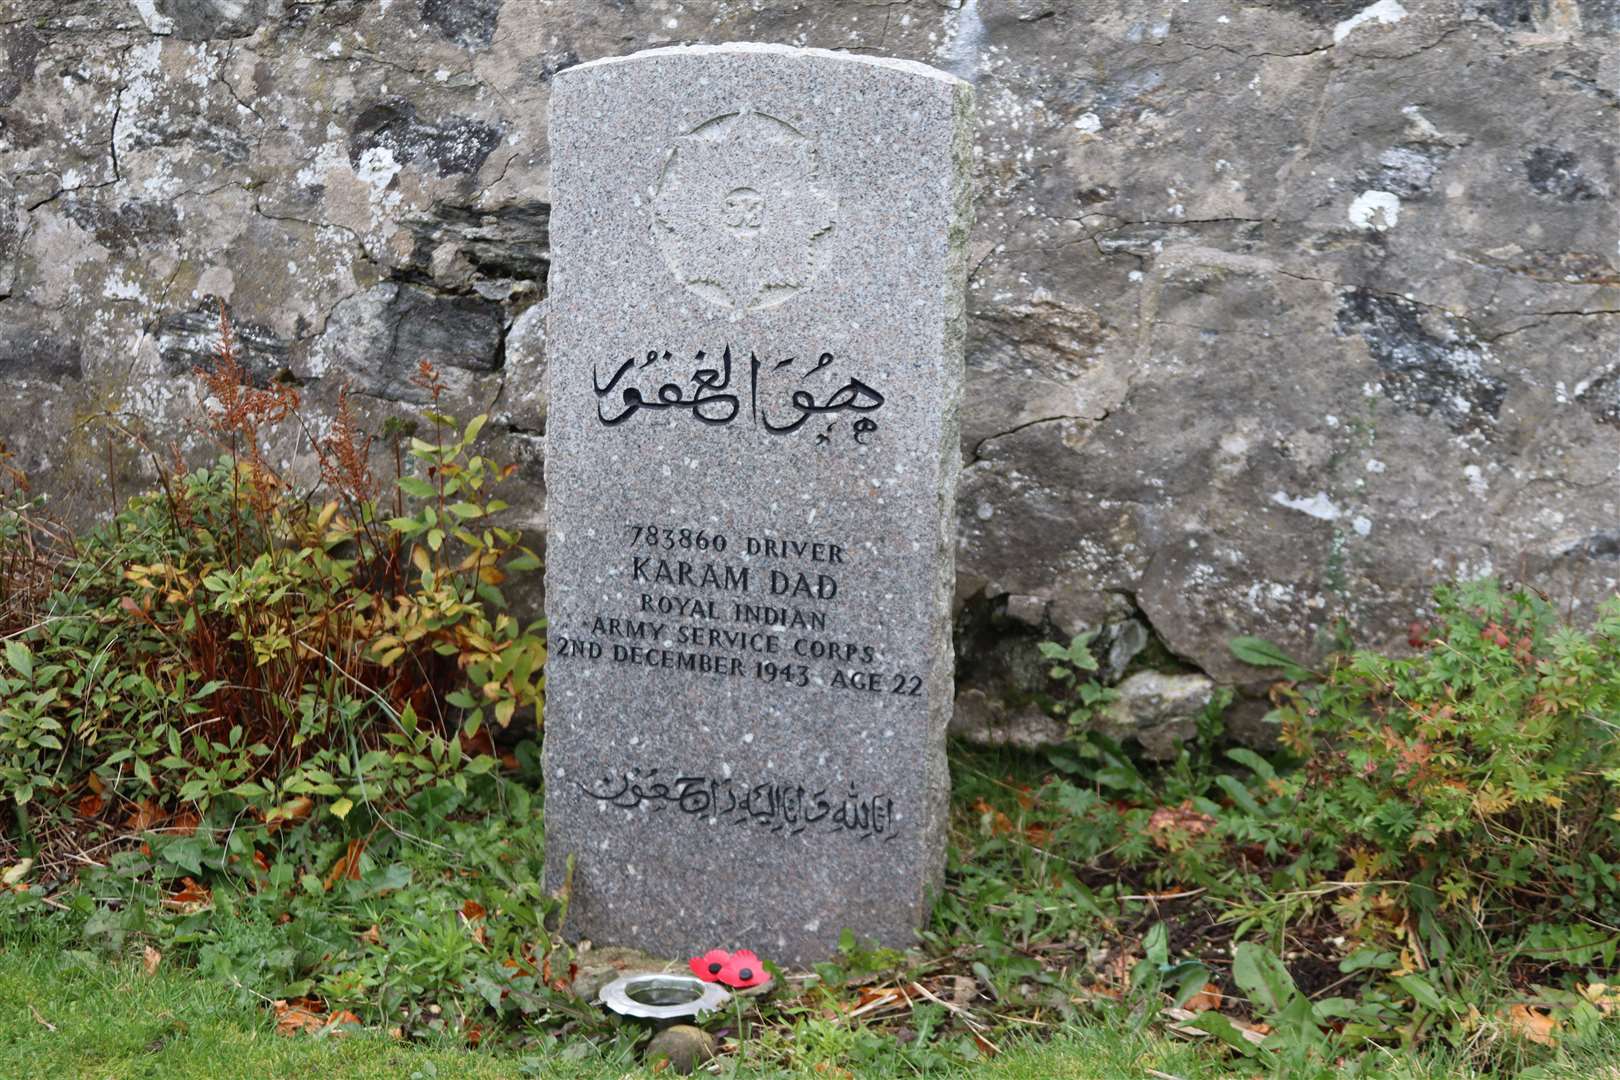 The gravestone of Karam Dad, buried in a corner at Grange Cemetery, with its Arabic inscription.